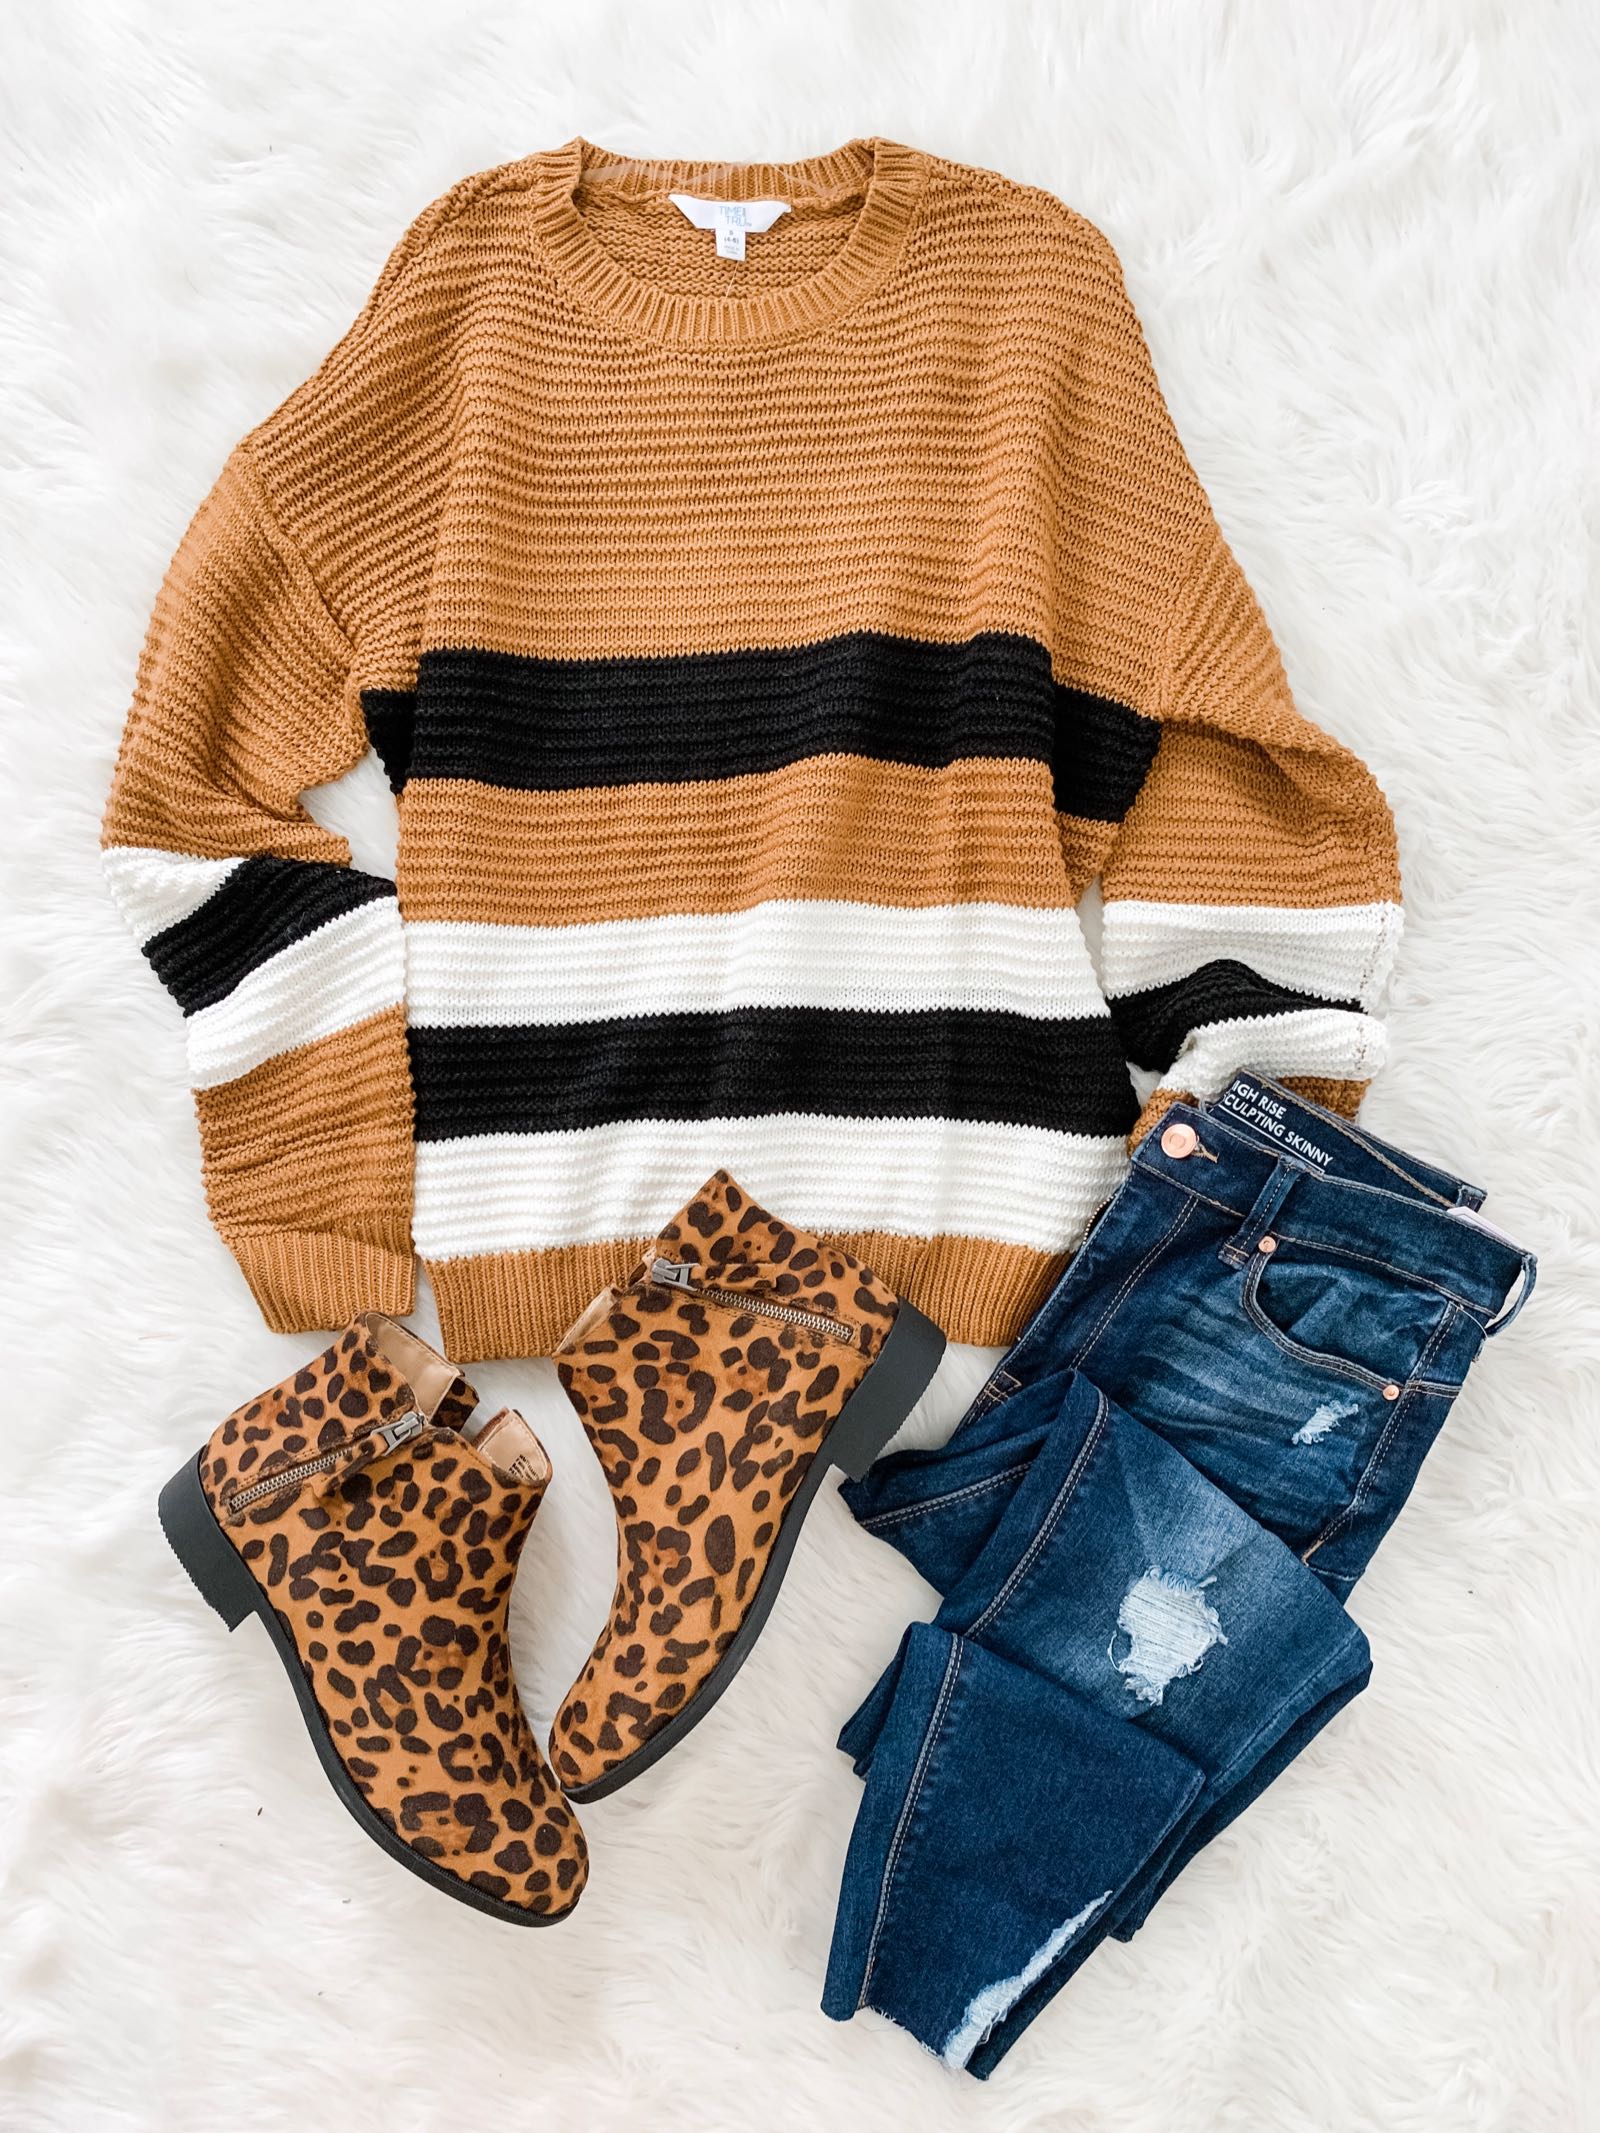 Fall outfit idea with stripe sweater and leopard booties